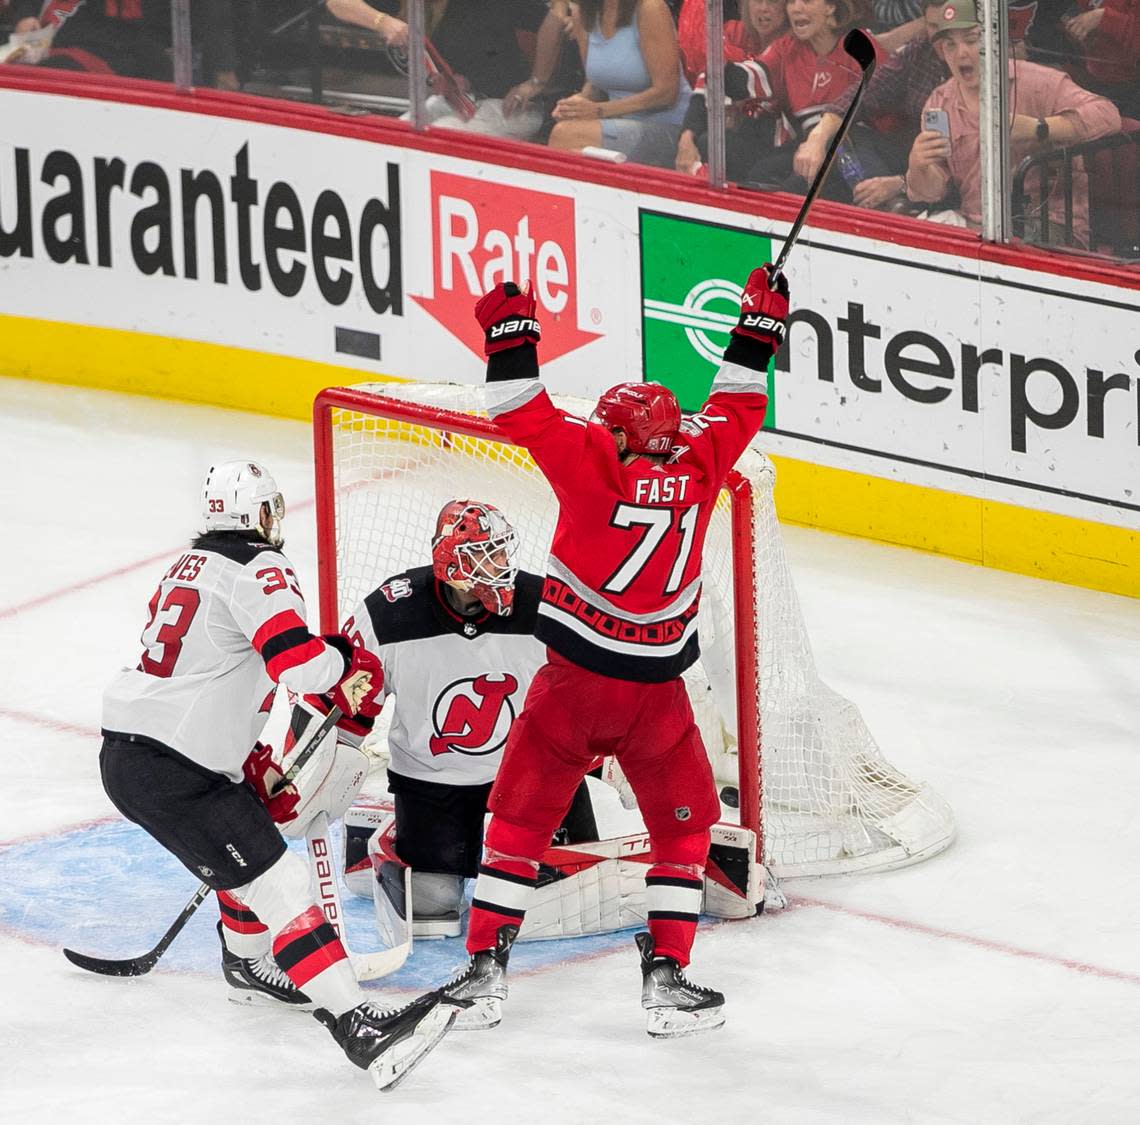 The Carolina Hurricanes Jesper Fast (71) scores the game winning goal in overtime, securing a 3-2 victory in Game 5 and clinching their second round Stanley Cup playoff series on Thursday, May 11, 2023 at PNC Arena in Raleigh, N.C.